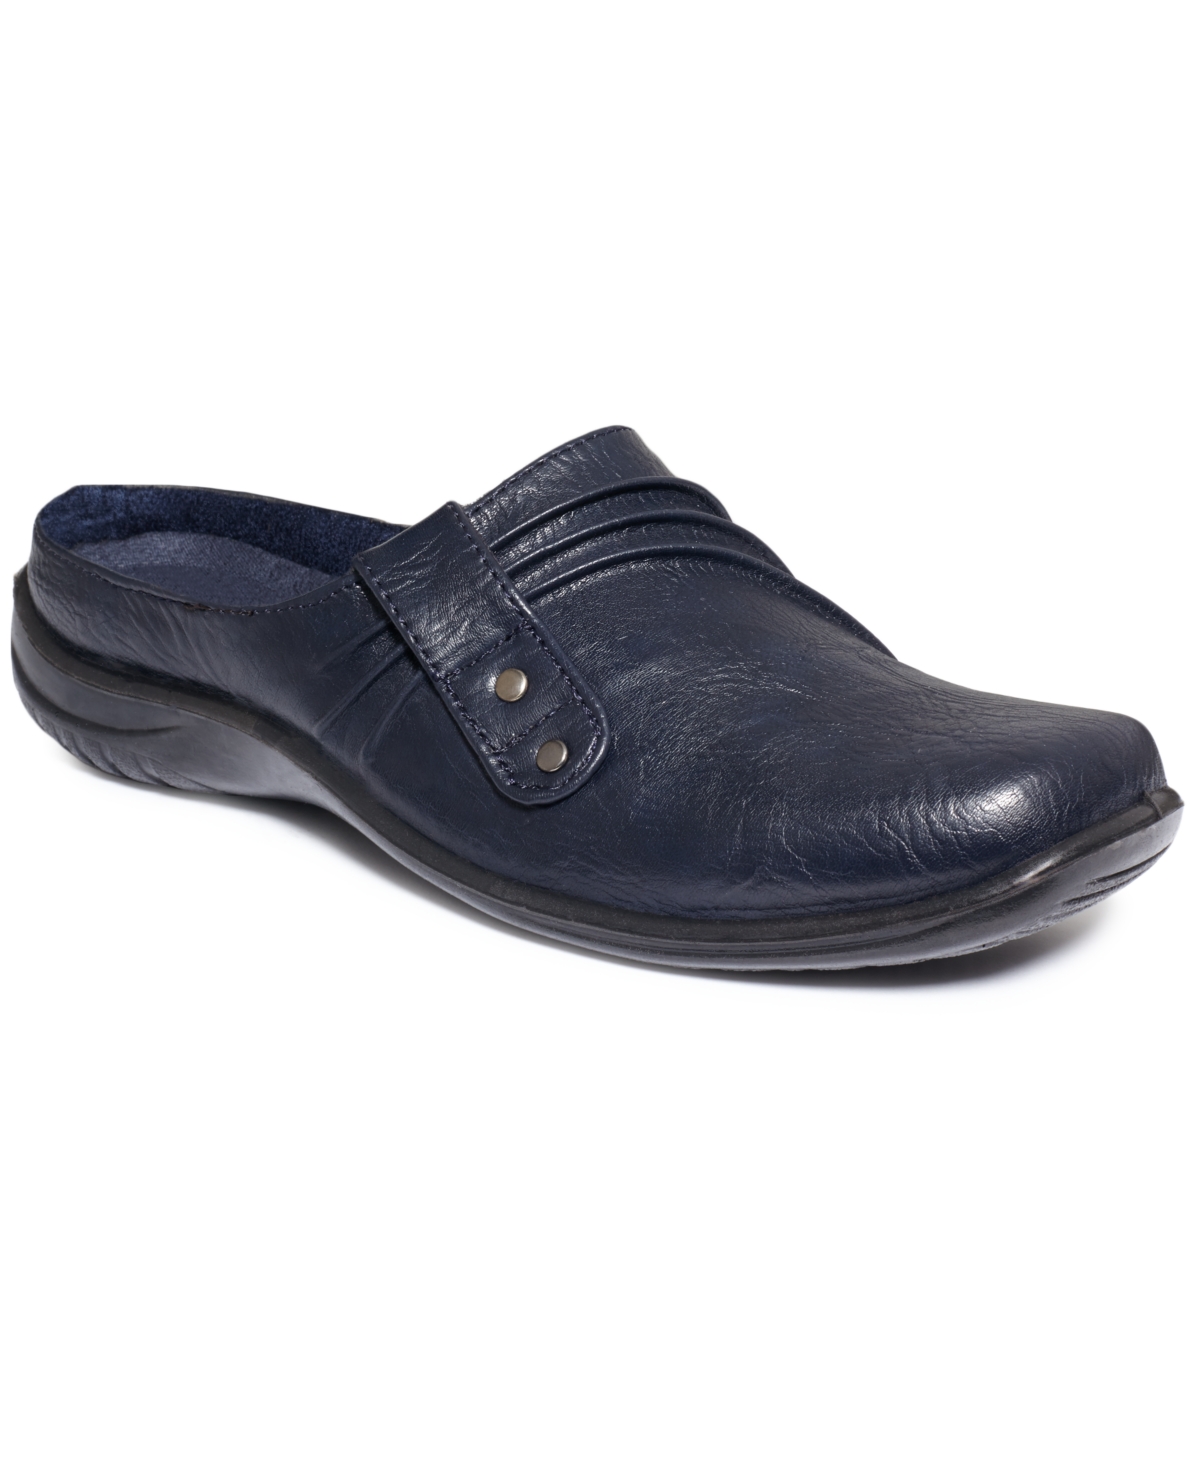 EASY STREET HOLLY COMFORT MULES WOMEN'S SHOES